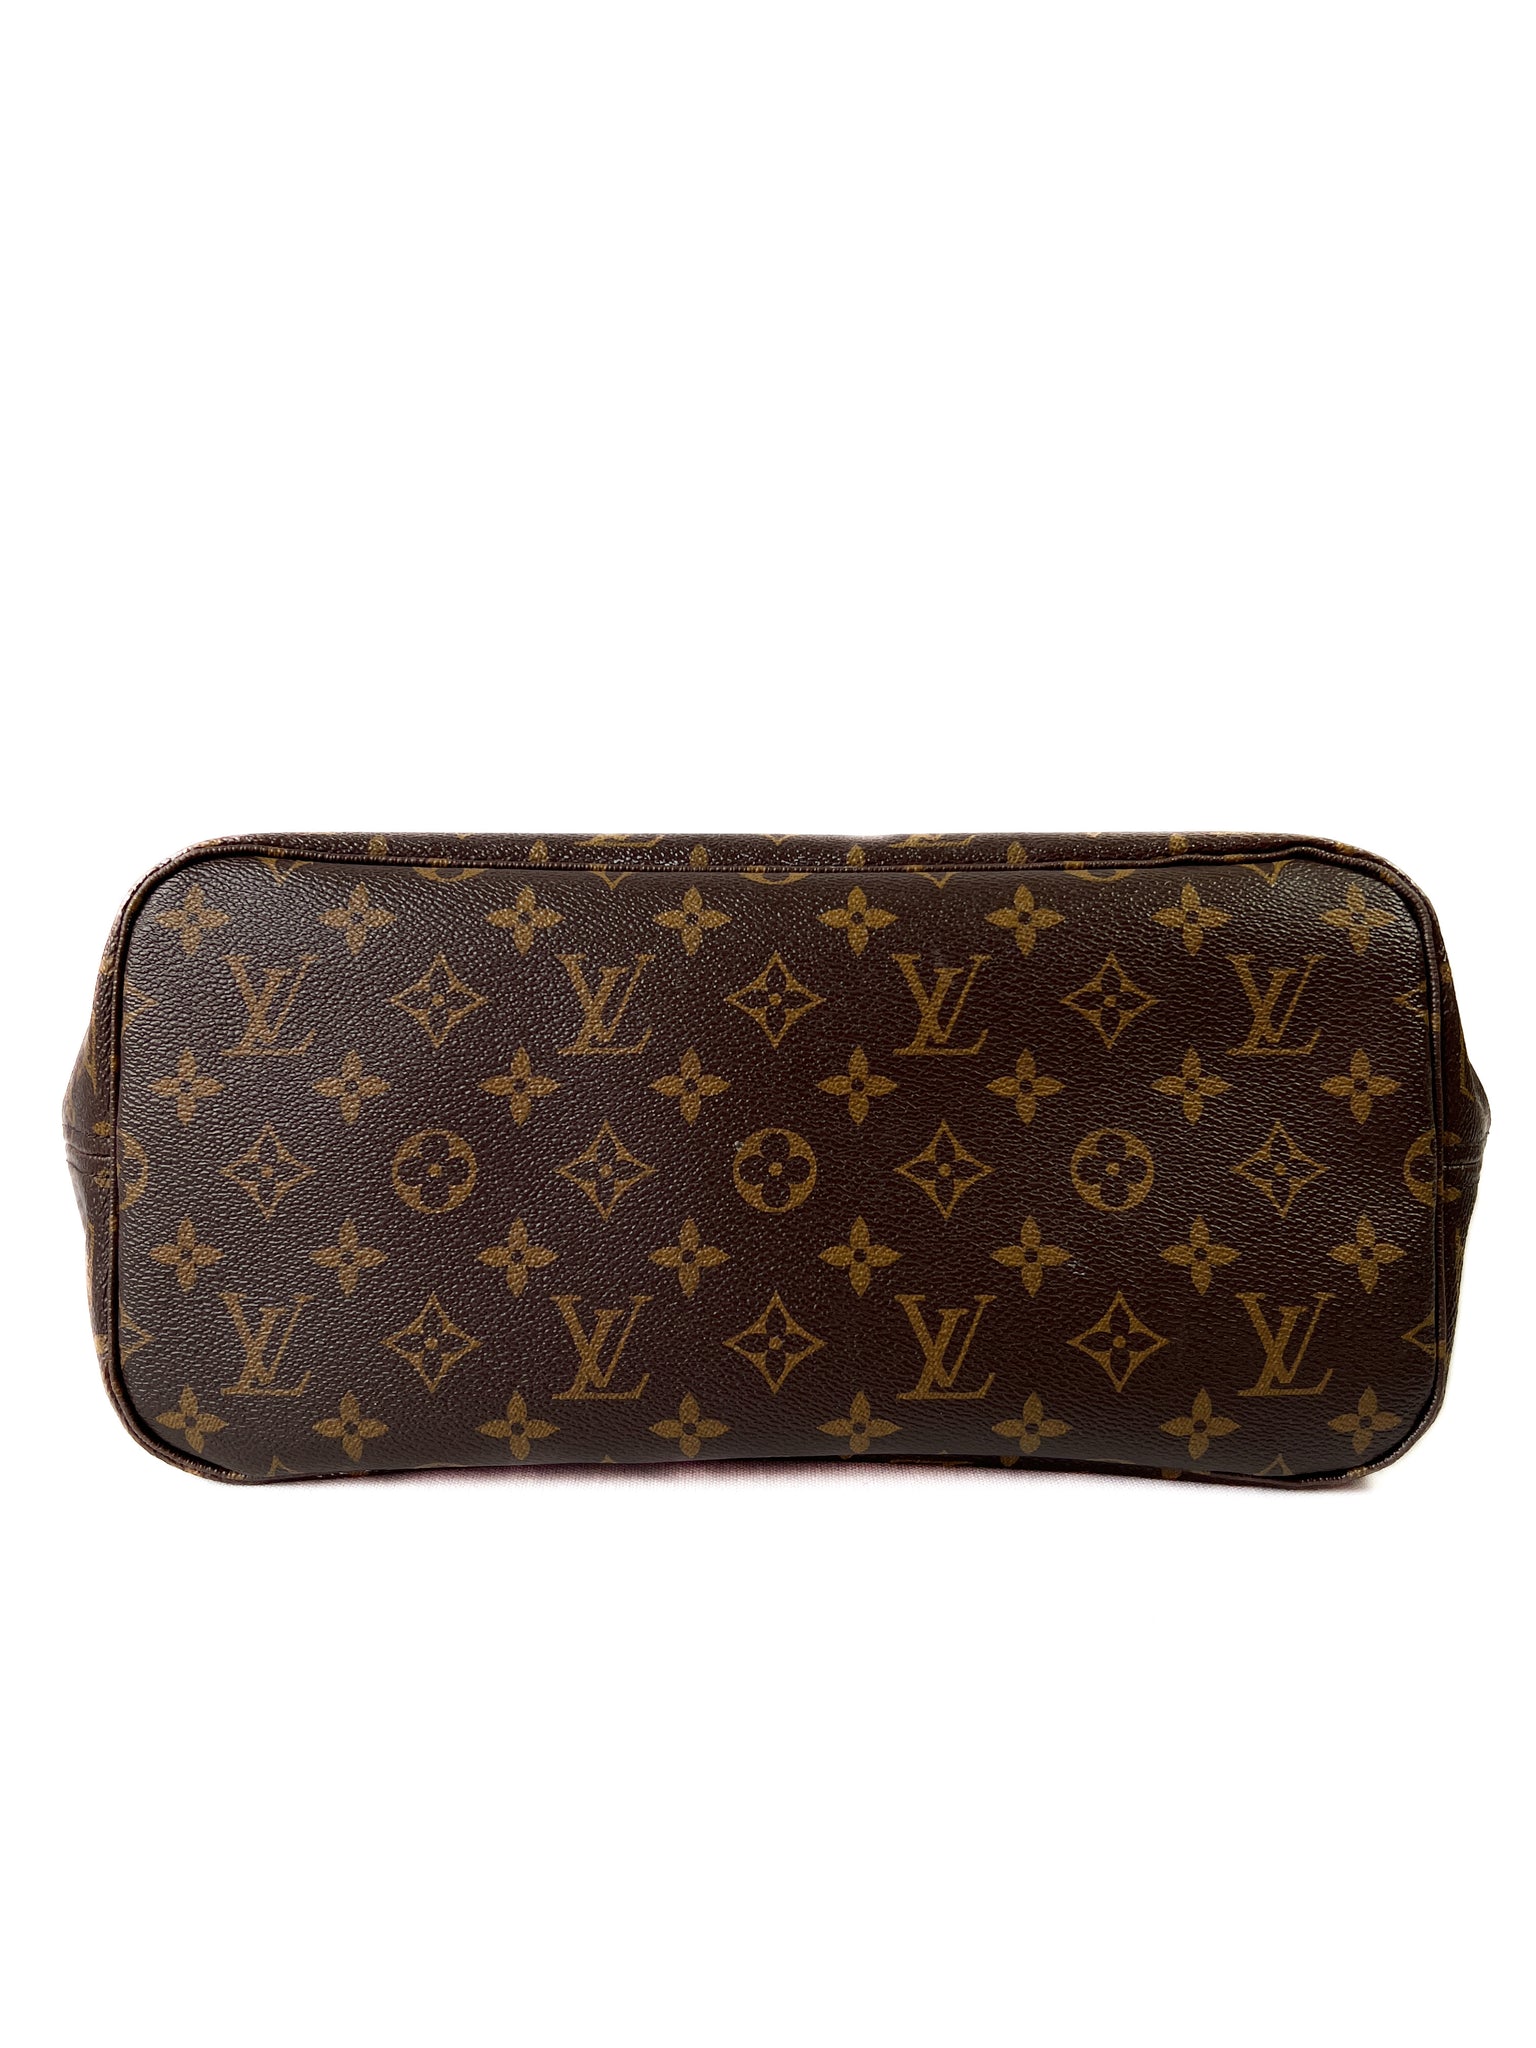 LOUIS VUITTON Coated Canvas Brown Monogram Duffle Bag - Default Title -  Article Consignment in 2023